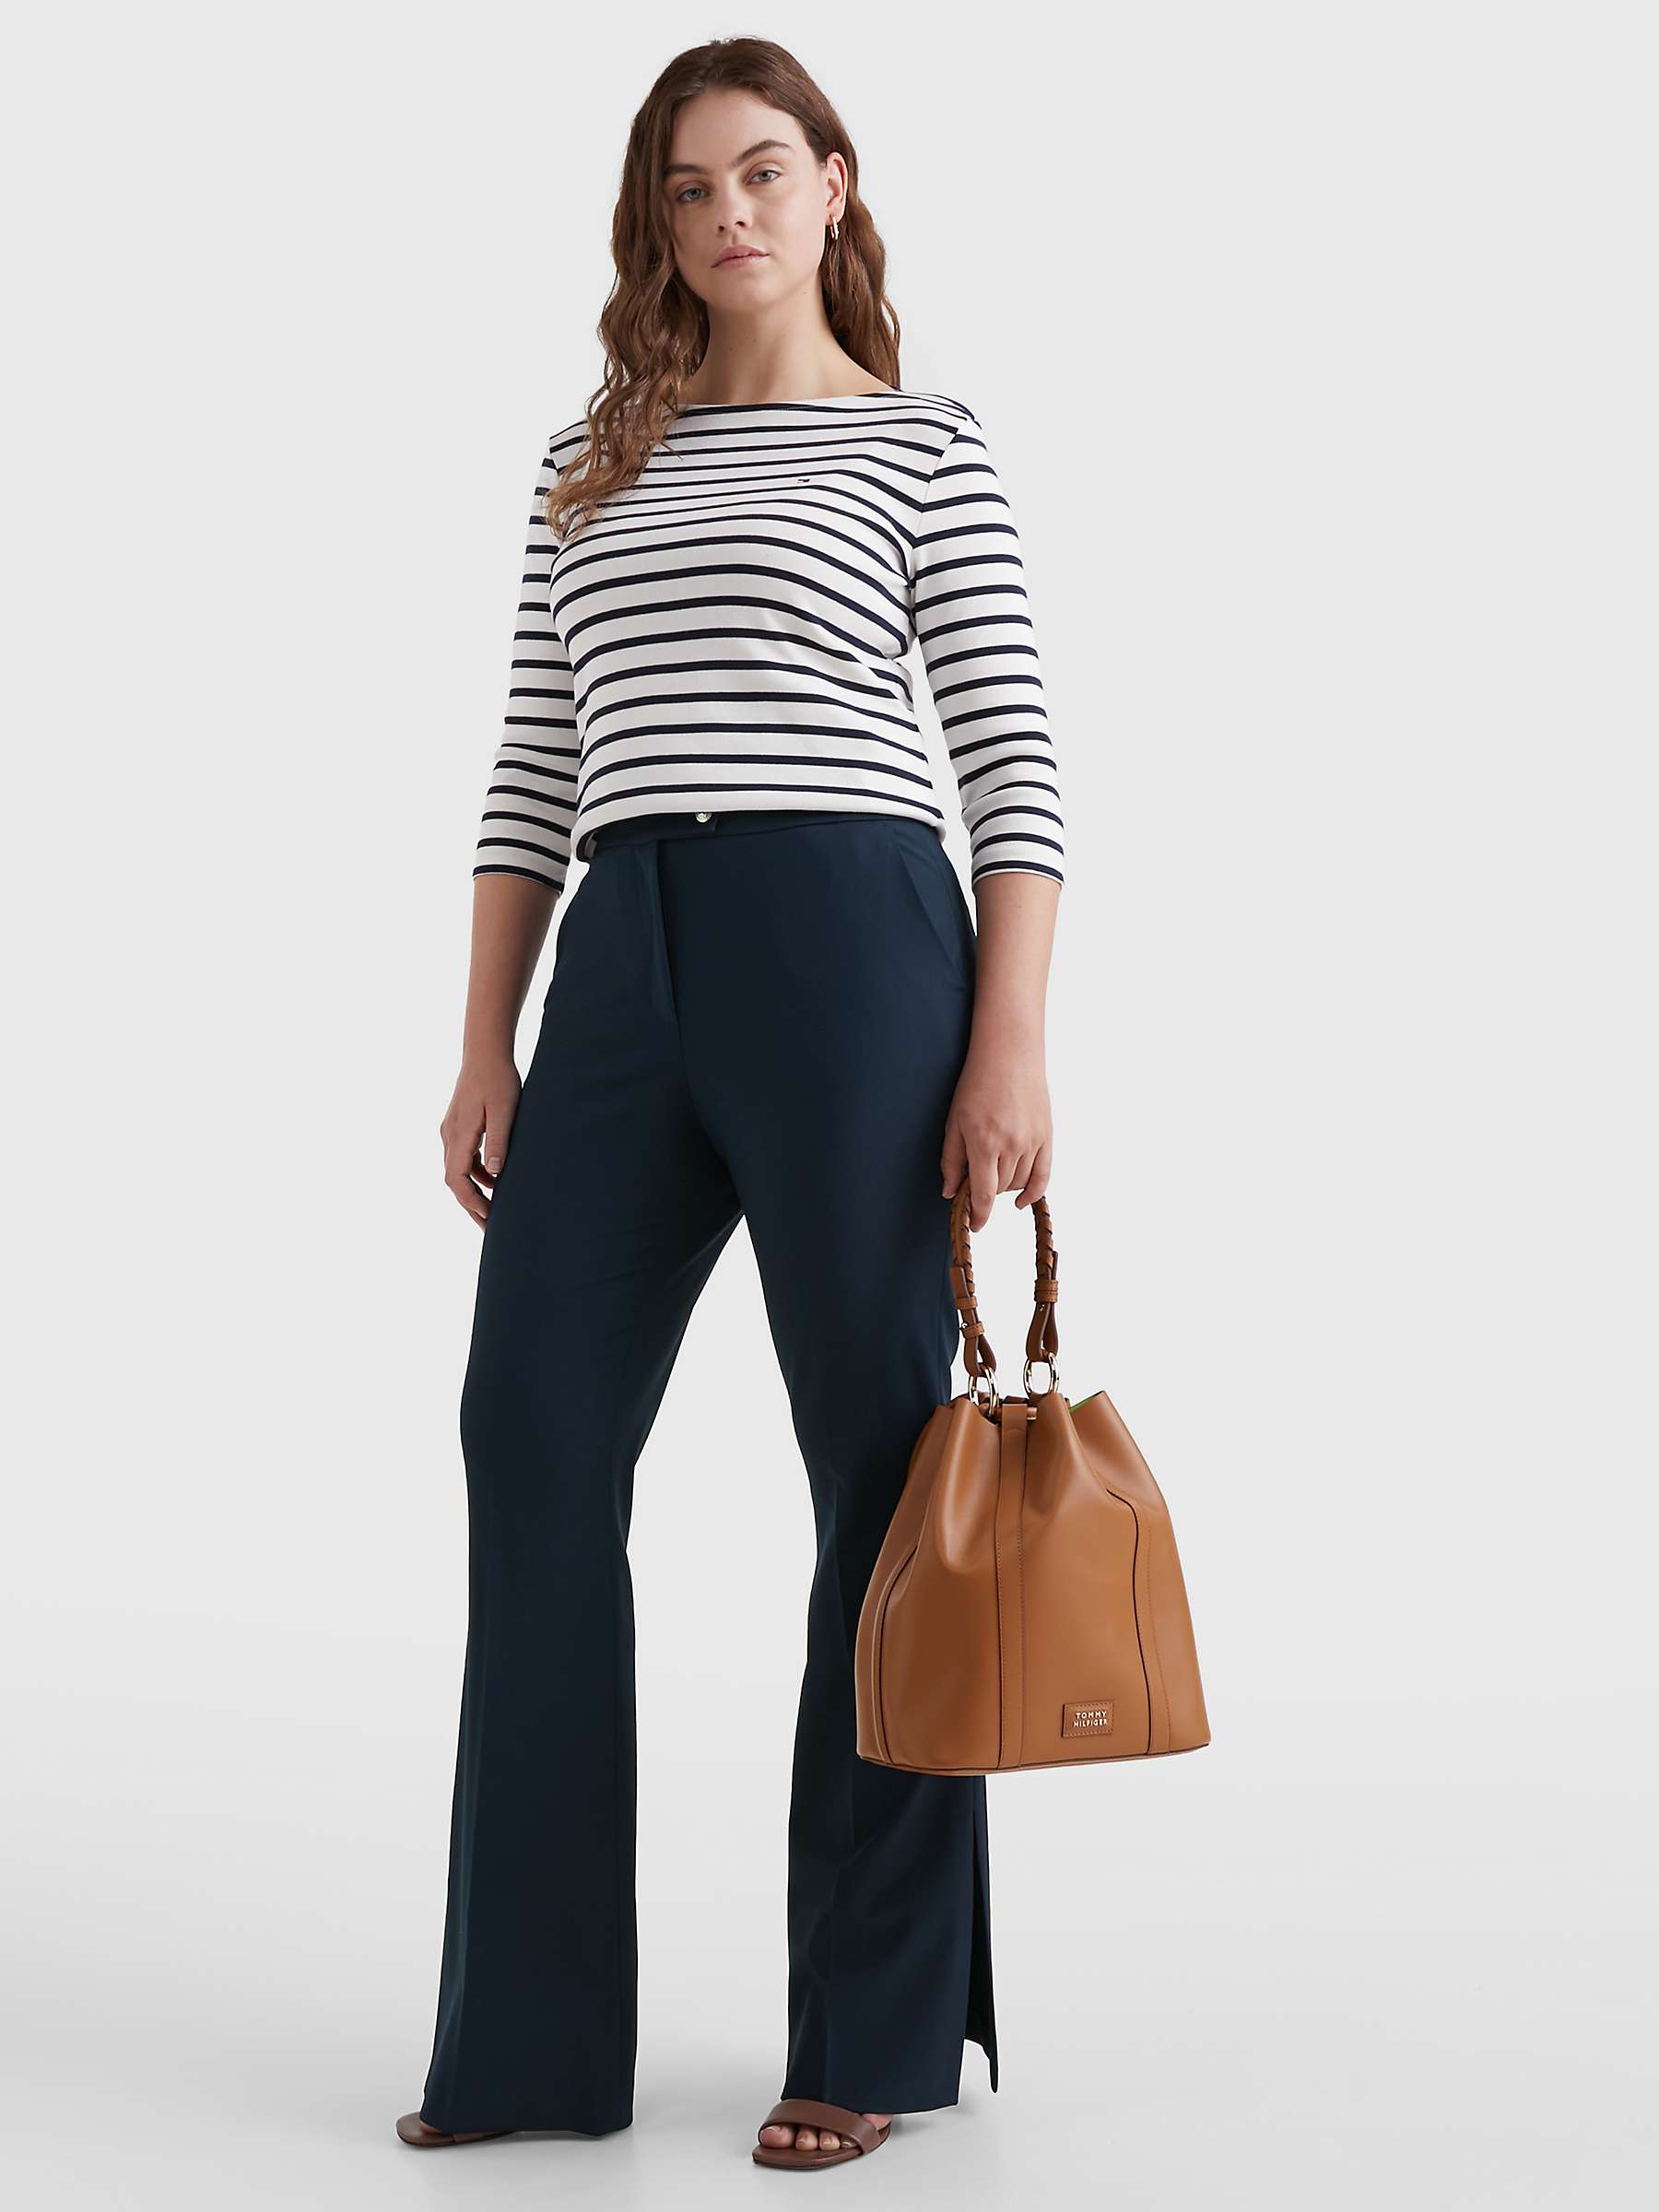 Buy Tommy Hilfiger Tailored Trousers, Navy Online at johnlewis.com